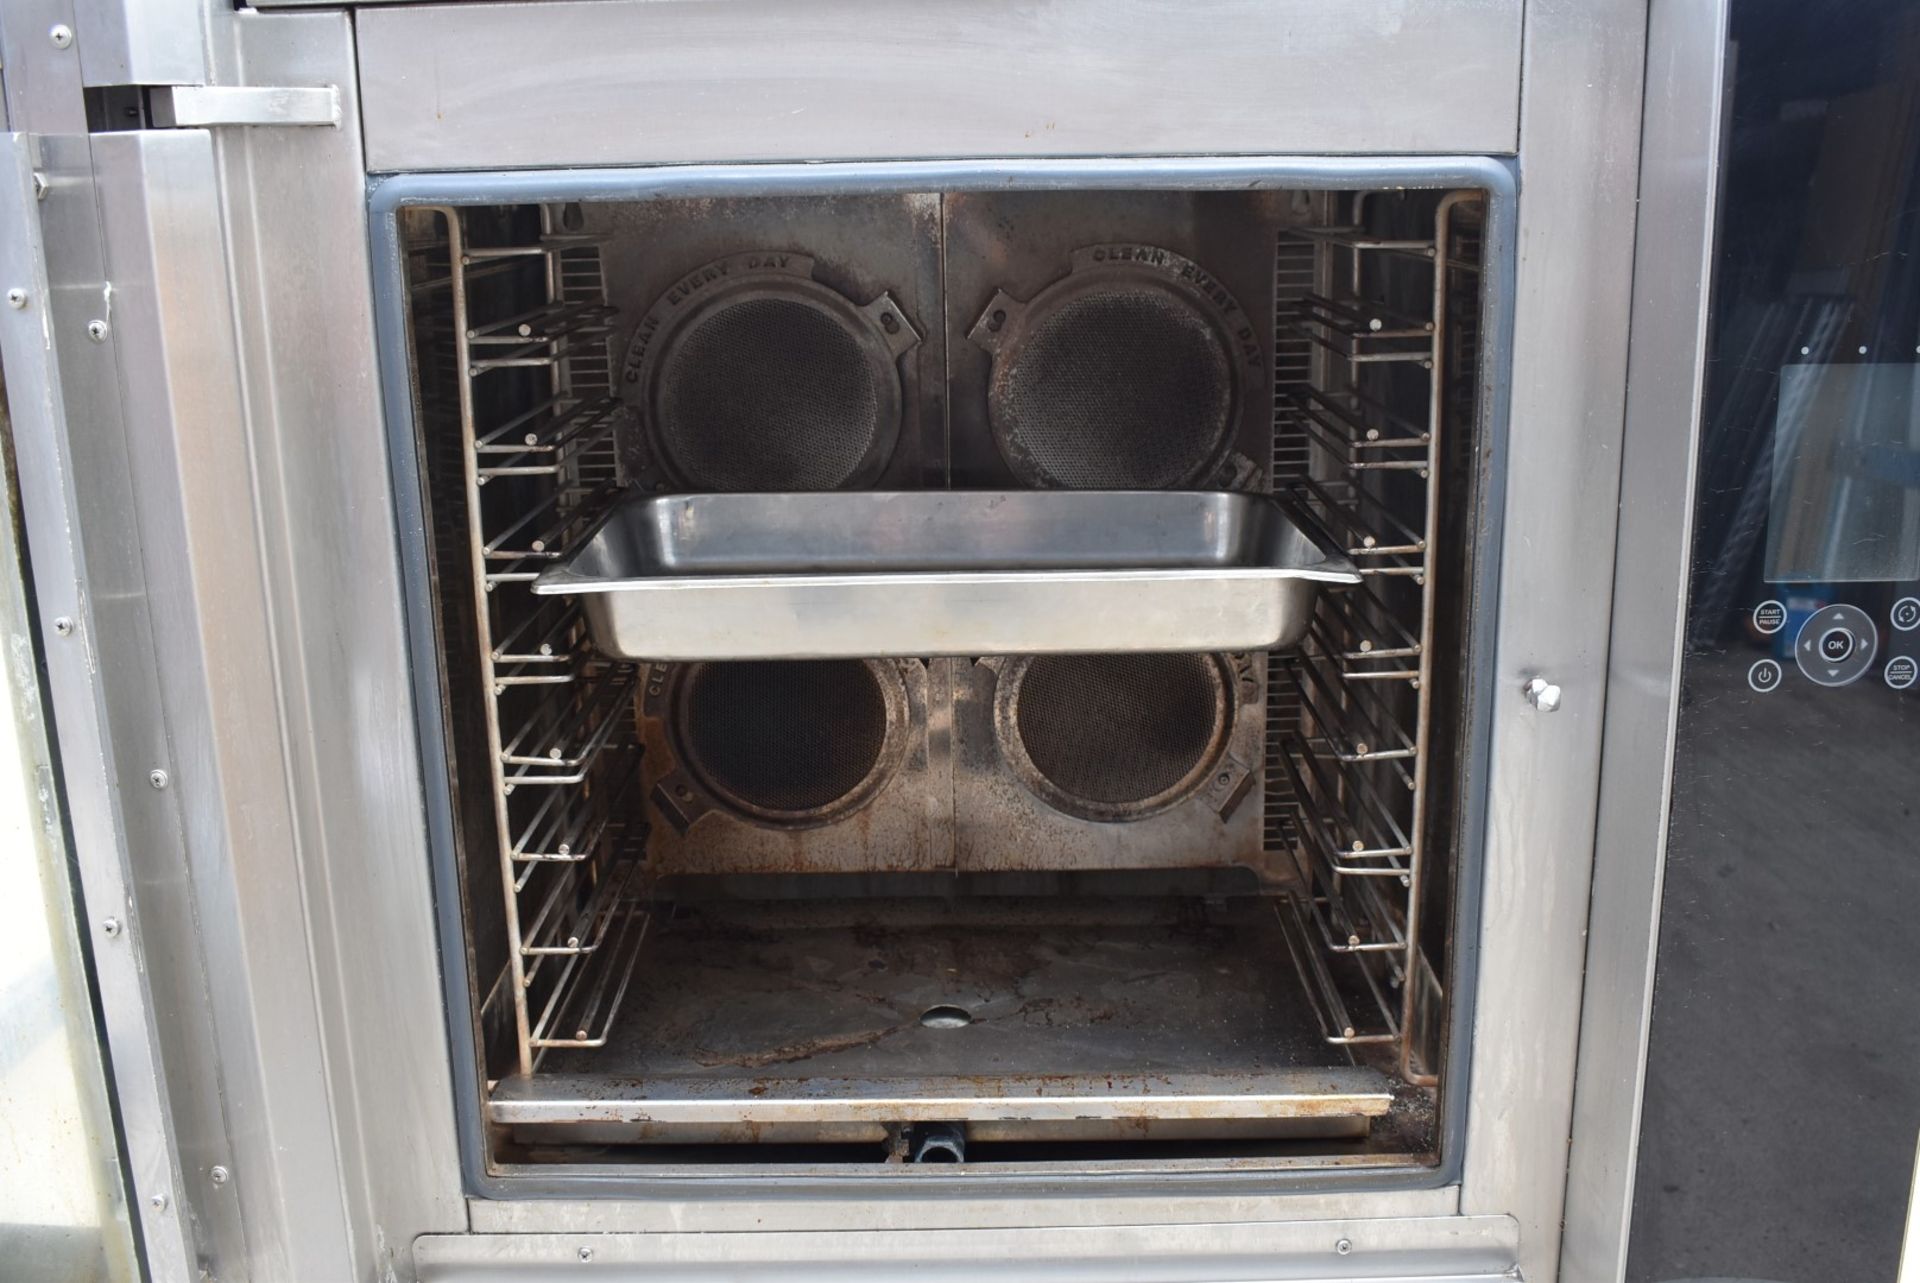 1 x Fri-Jado Turbo Retail 8 Grid Combi Oven - 3 Phase Combi Oven With Various Cooking Programs - Image 23 of 24